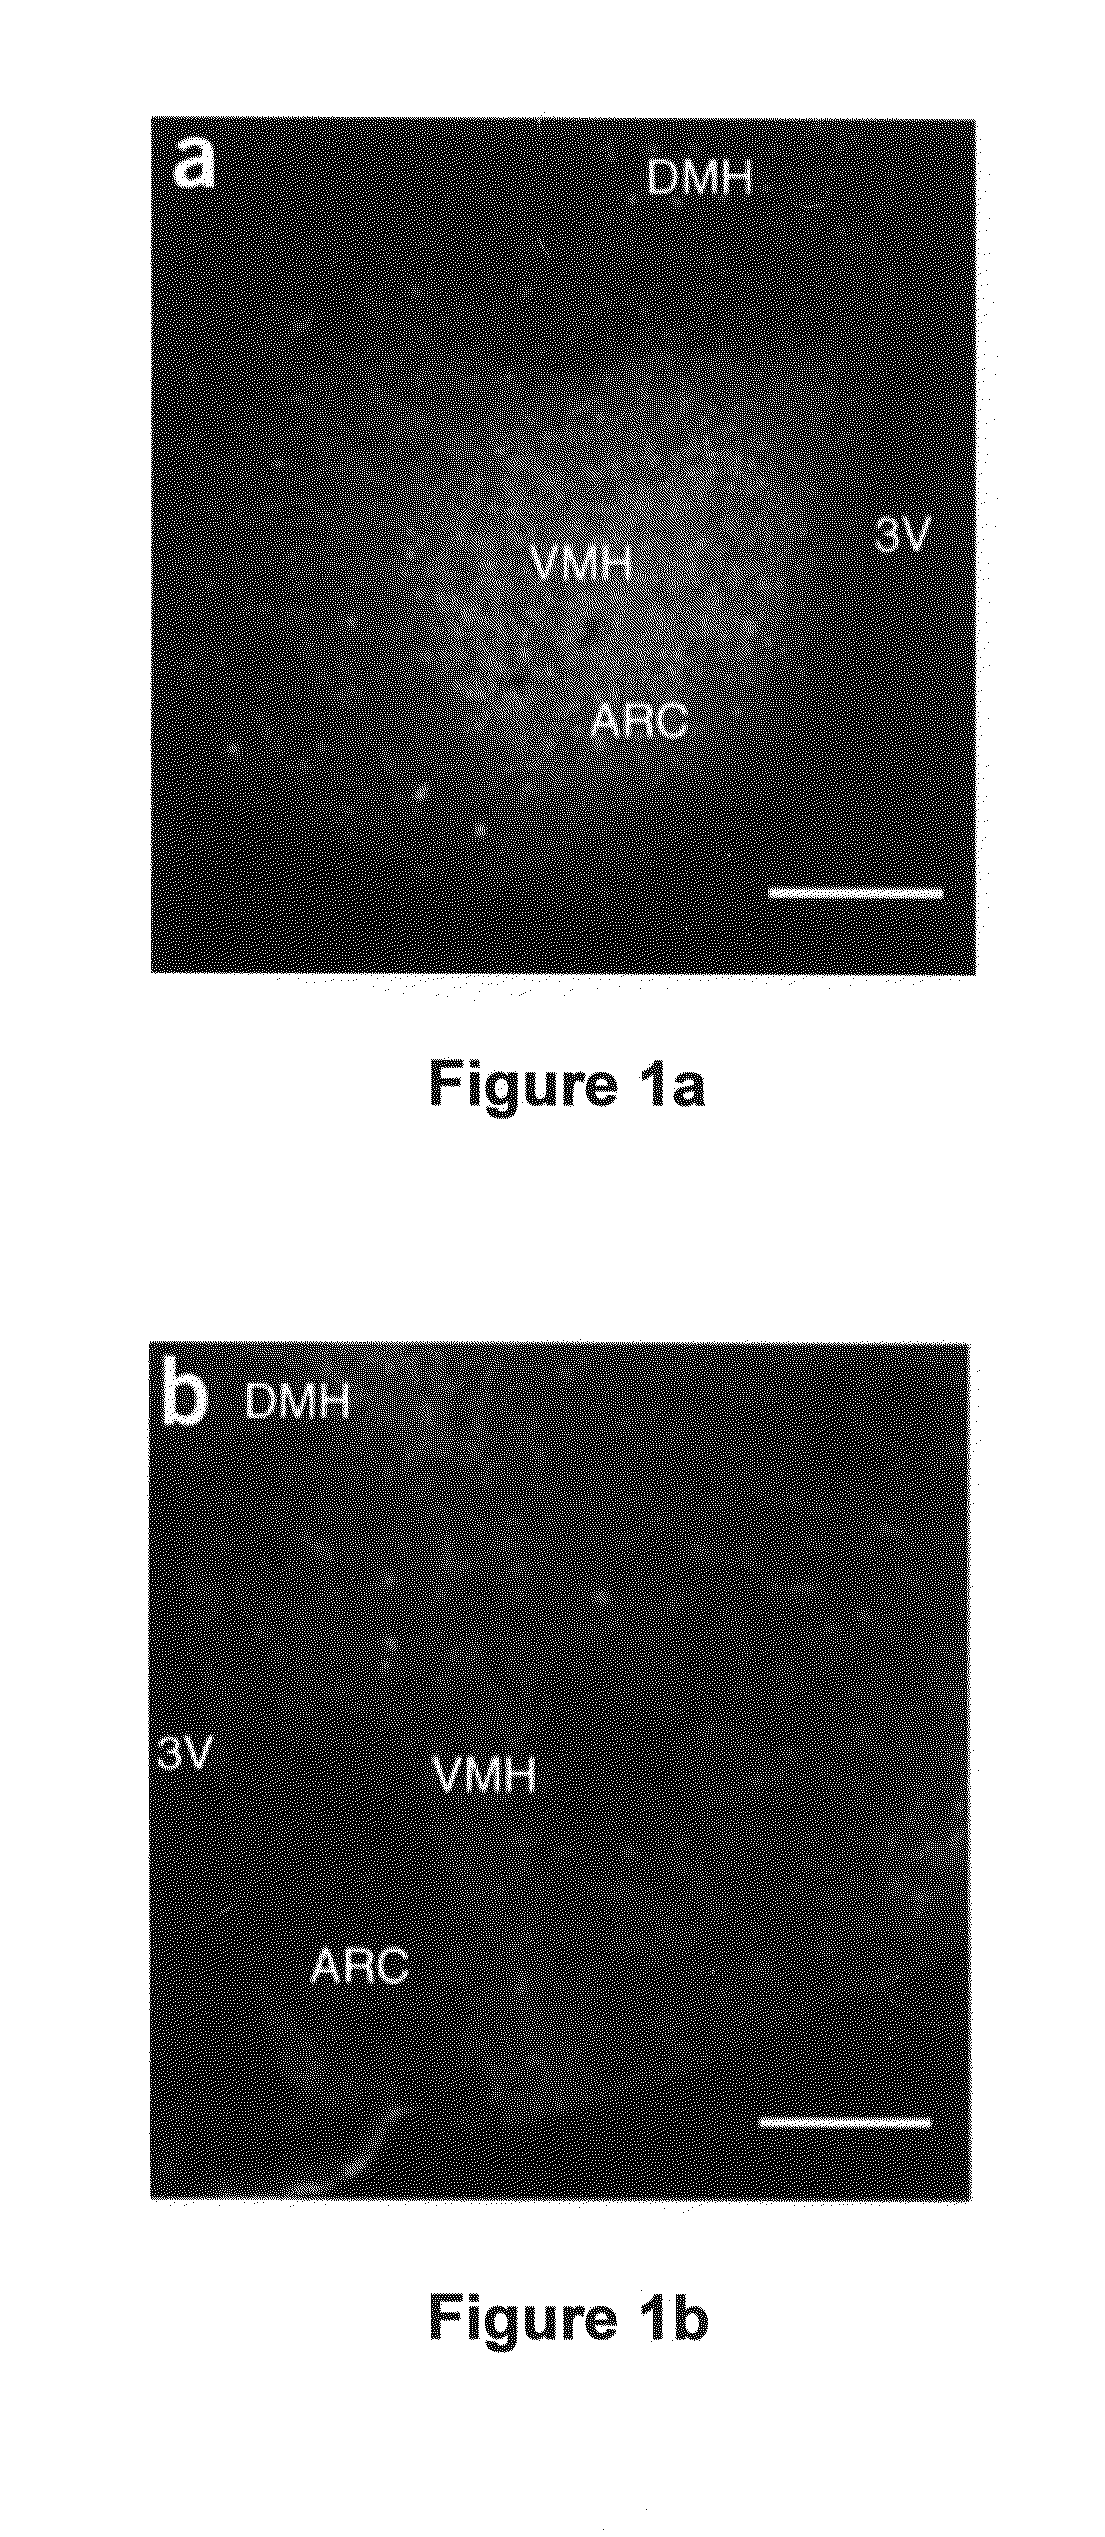 Treatment of Metabolic-Related Disorders Using Hypothalamic Gene Transfer of BDNF and Compositions Therefor